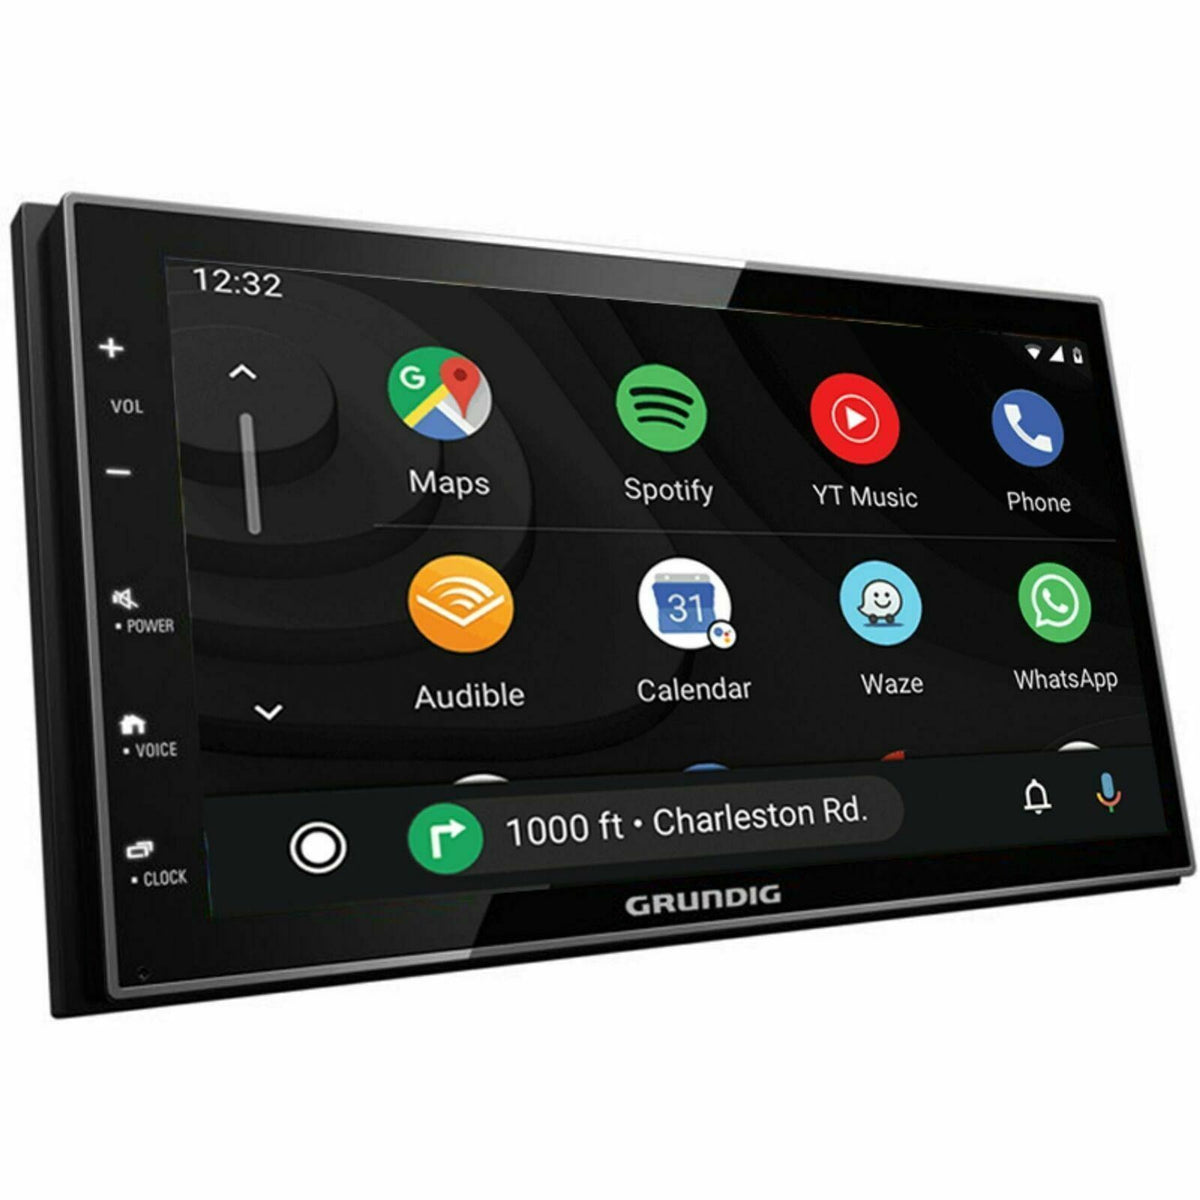 GX-3800 6.8" Shallow Chassis Ddin Receiver w/ Carplay & Android Auto Bluetooth